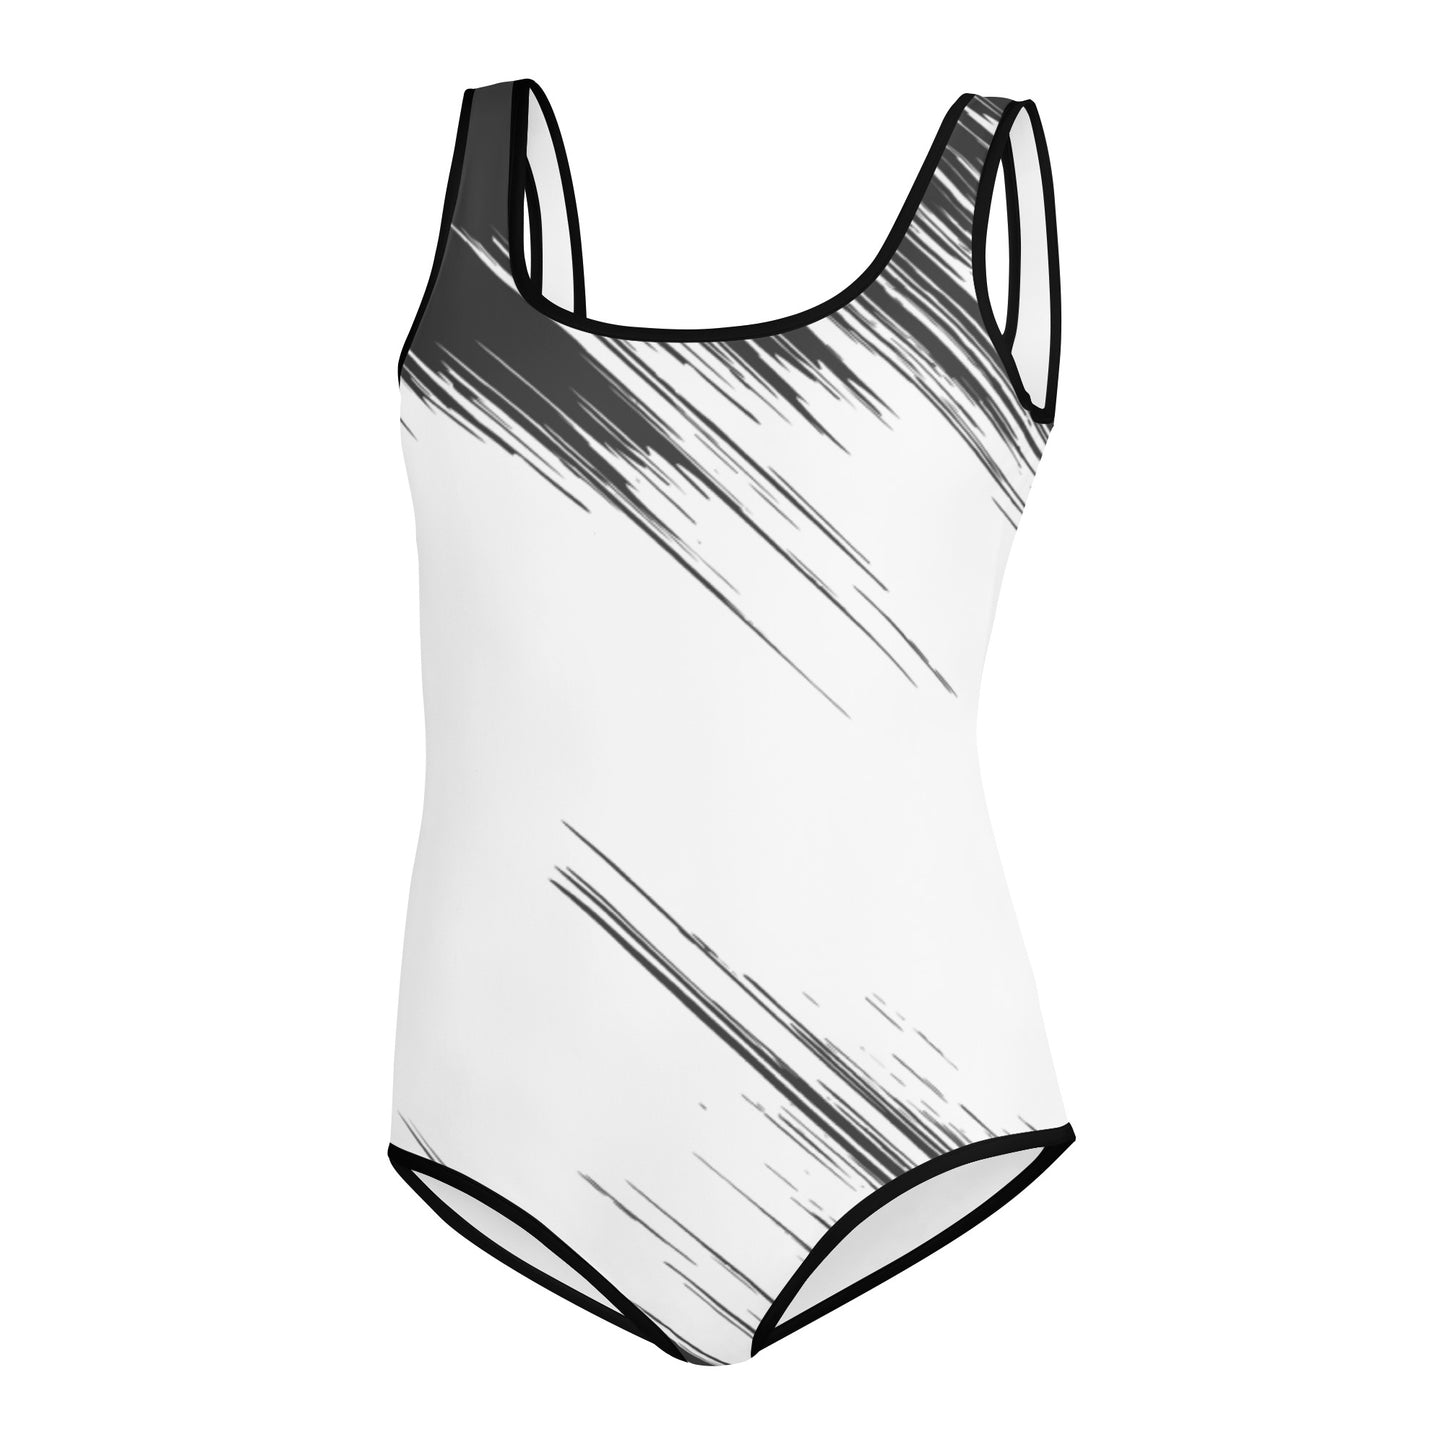 Sophisticated Cruise Youth Swimsuit by Baked Fresca